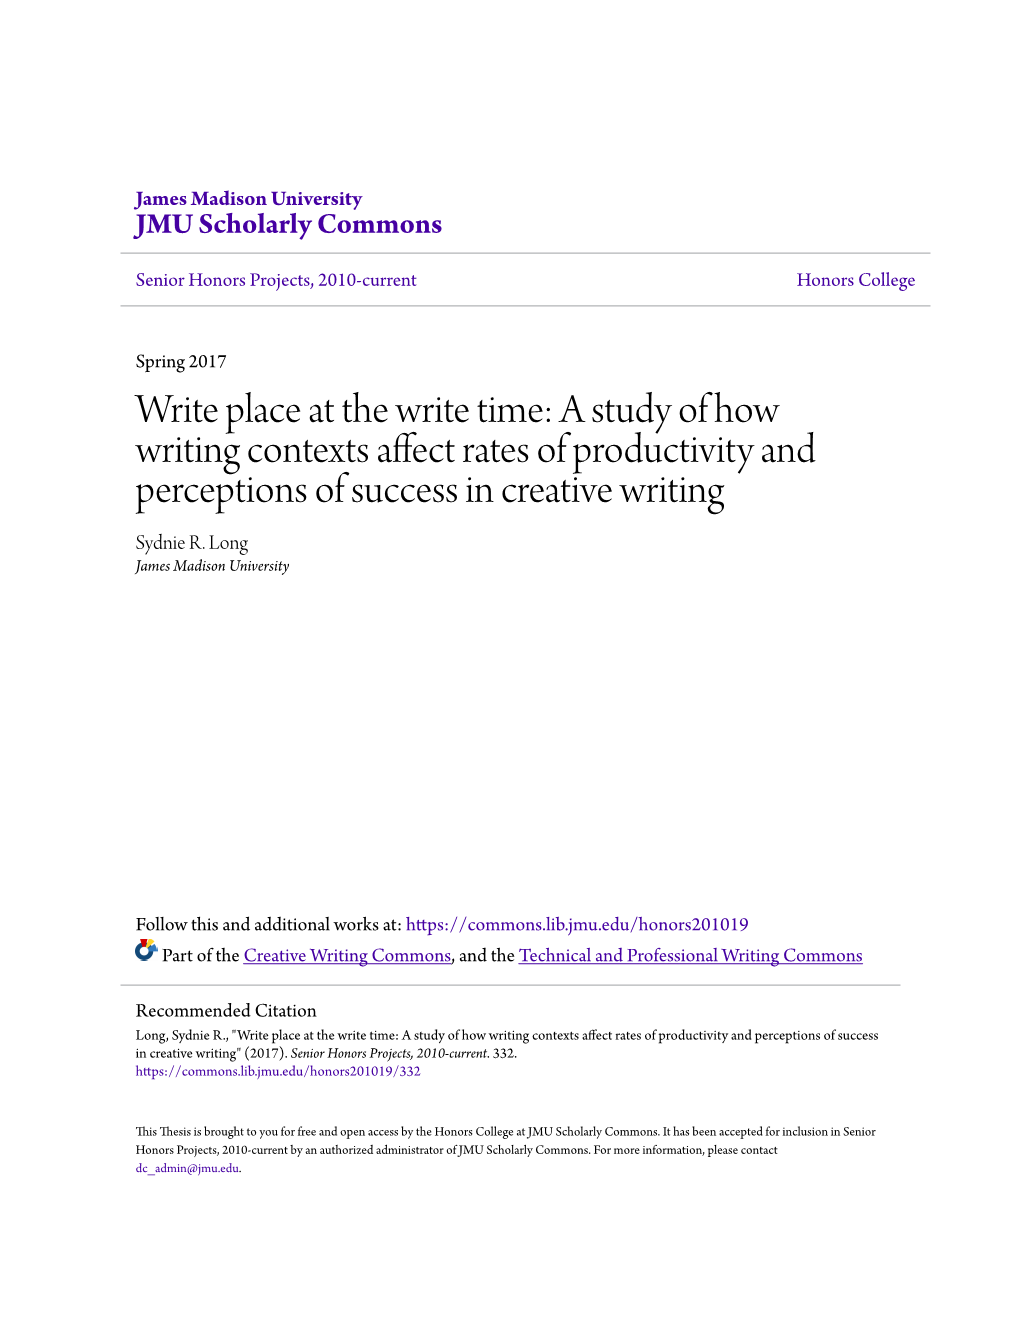 A Study of How Writing Contexts Affect Rates of Productivity and Perceptions of Success in Creative Writing Sydnie R